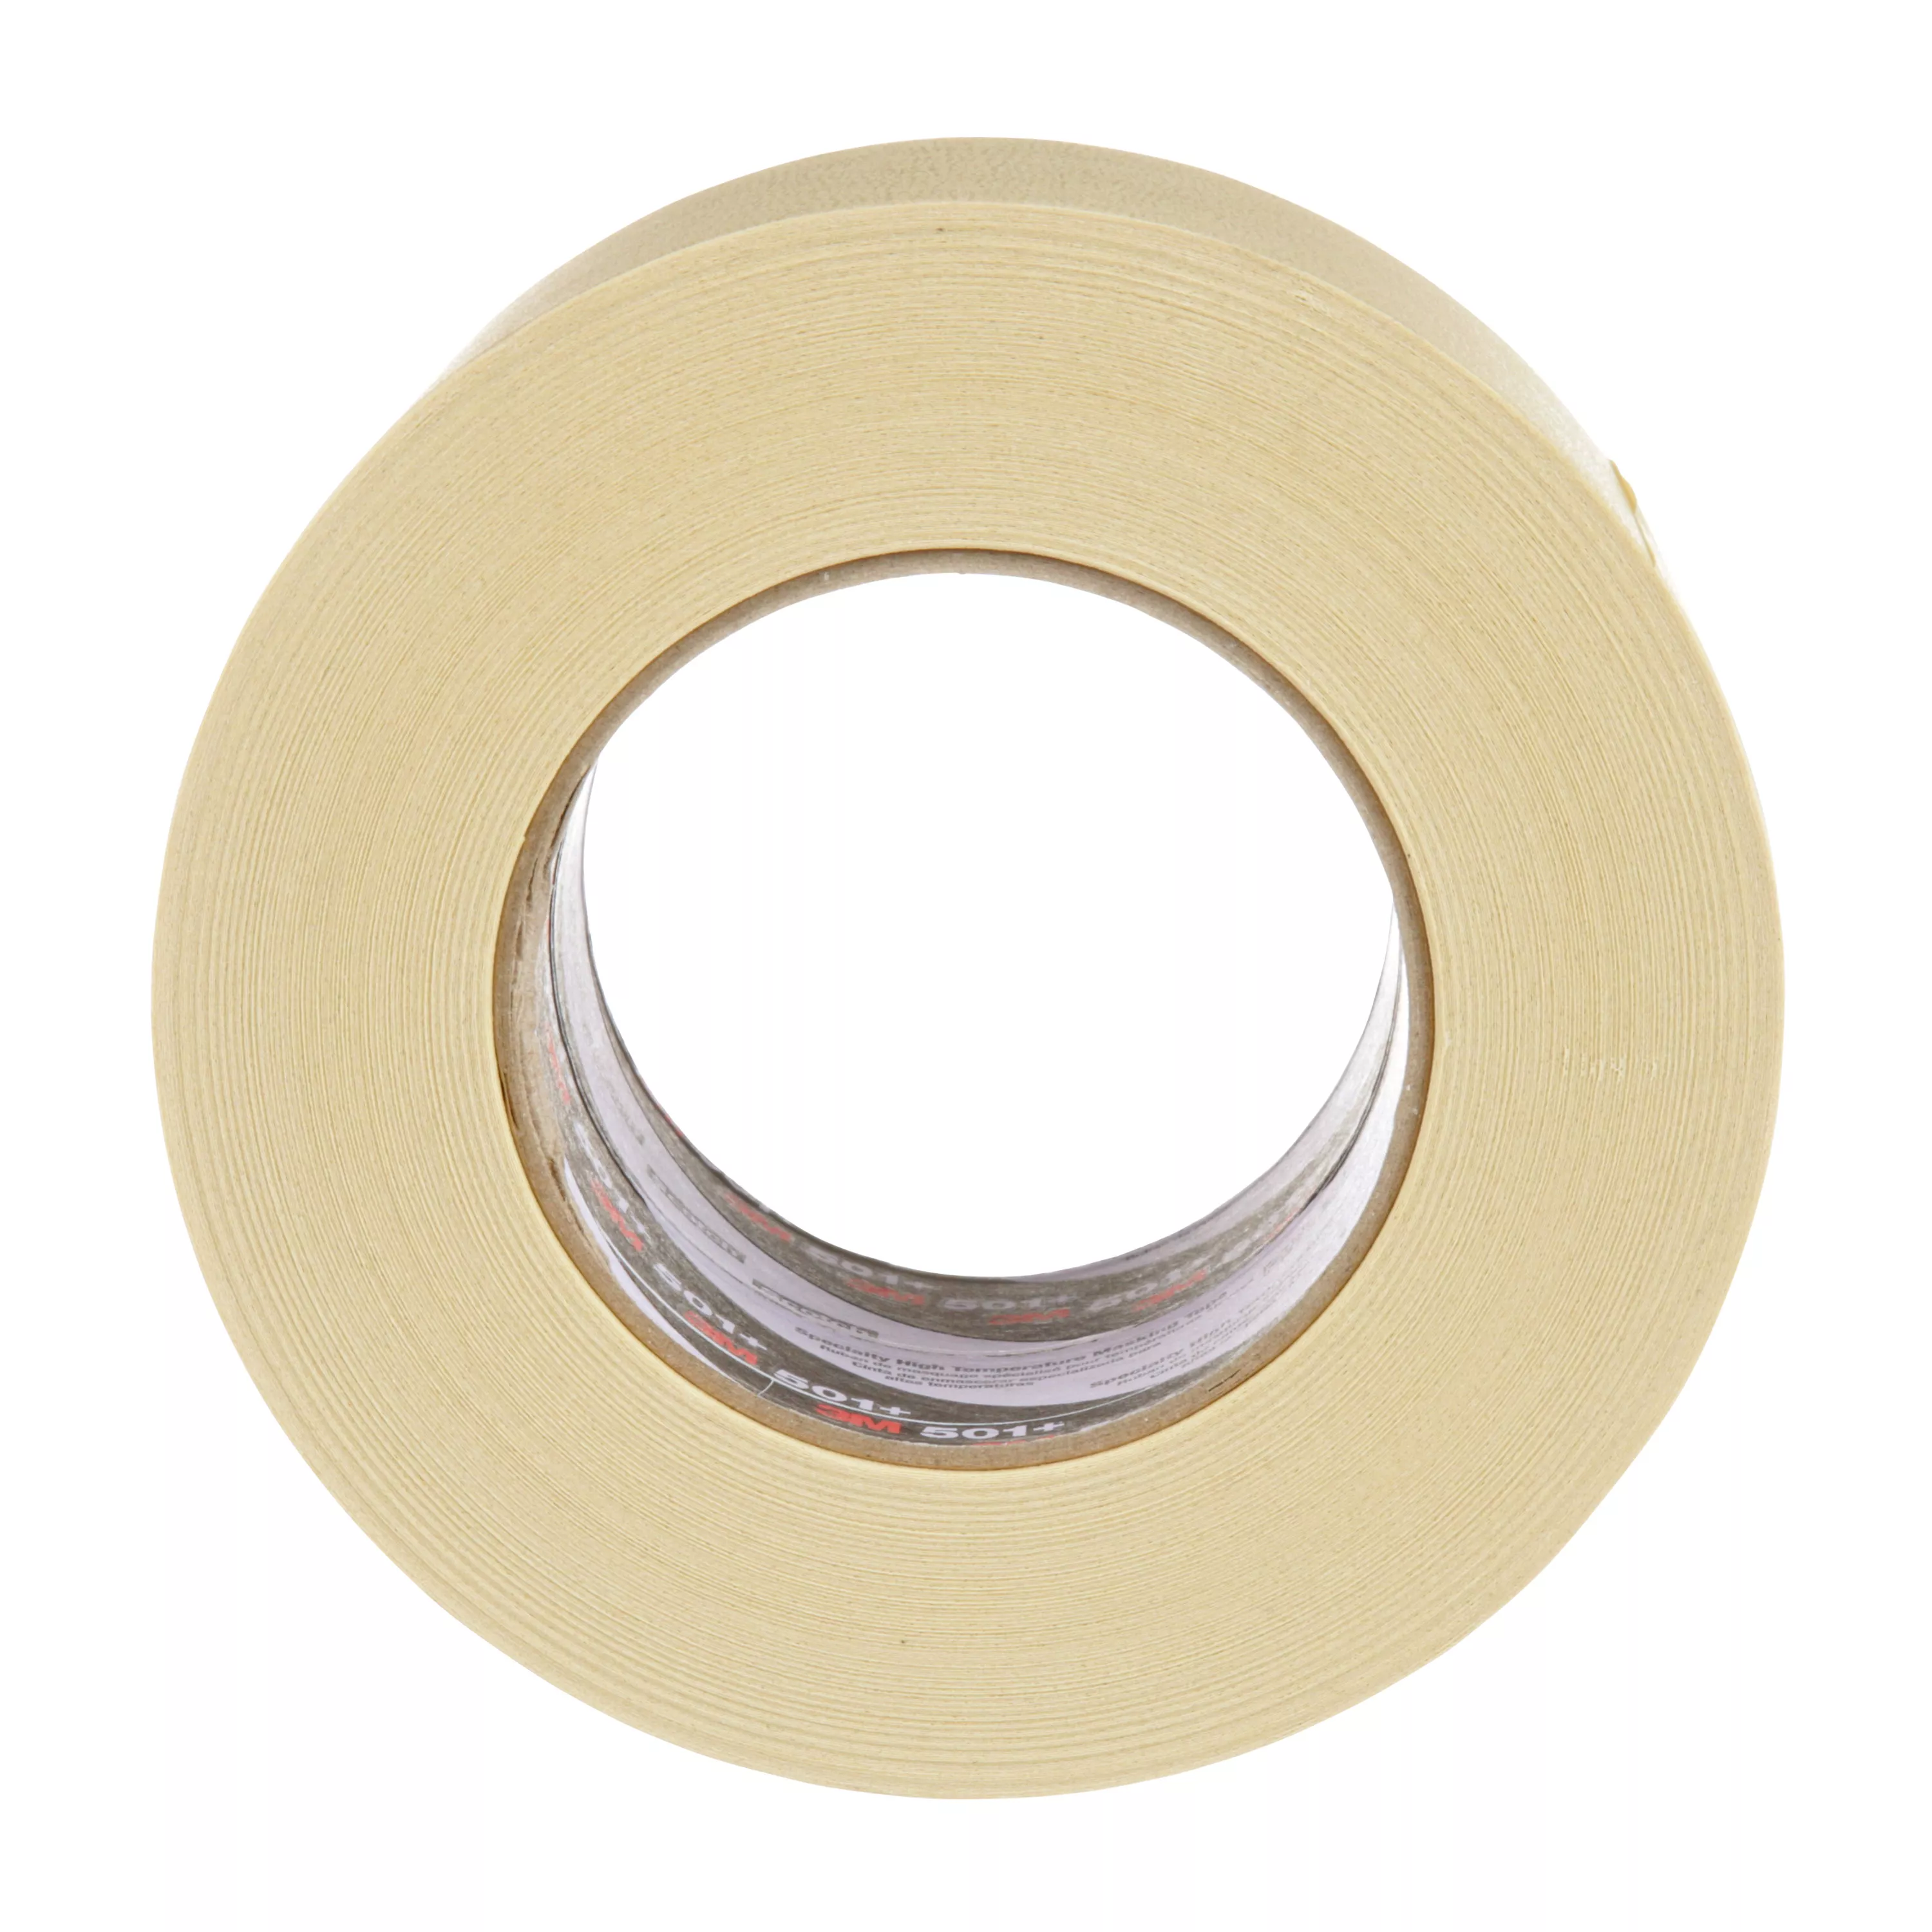 SKU 7000138489 | 3M™ Specialty High Temperature Masking Tape 501+